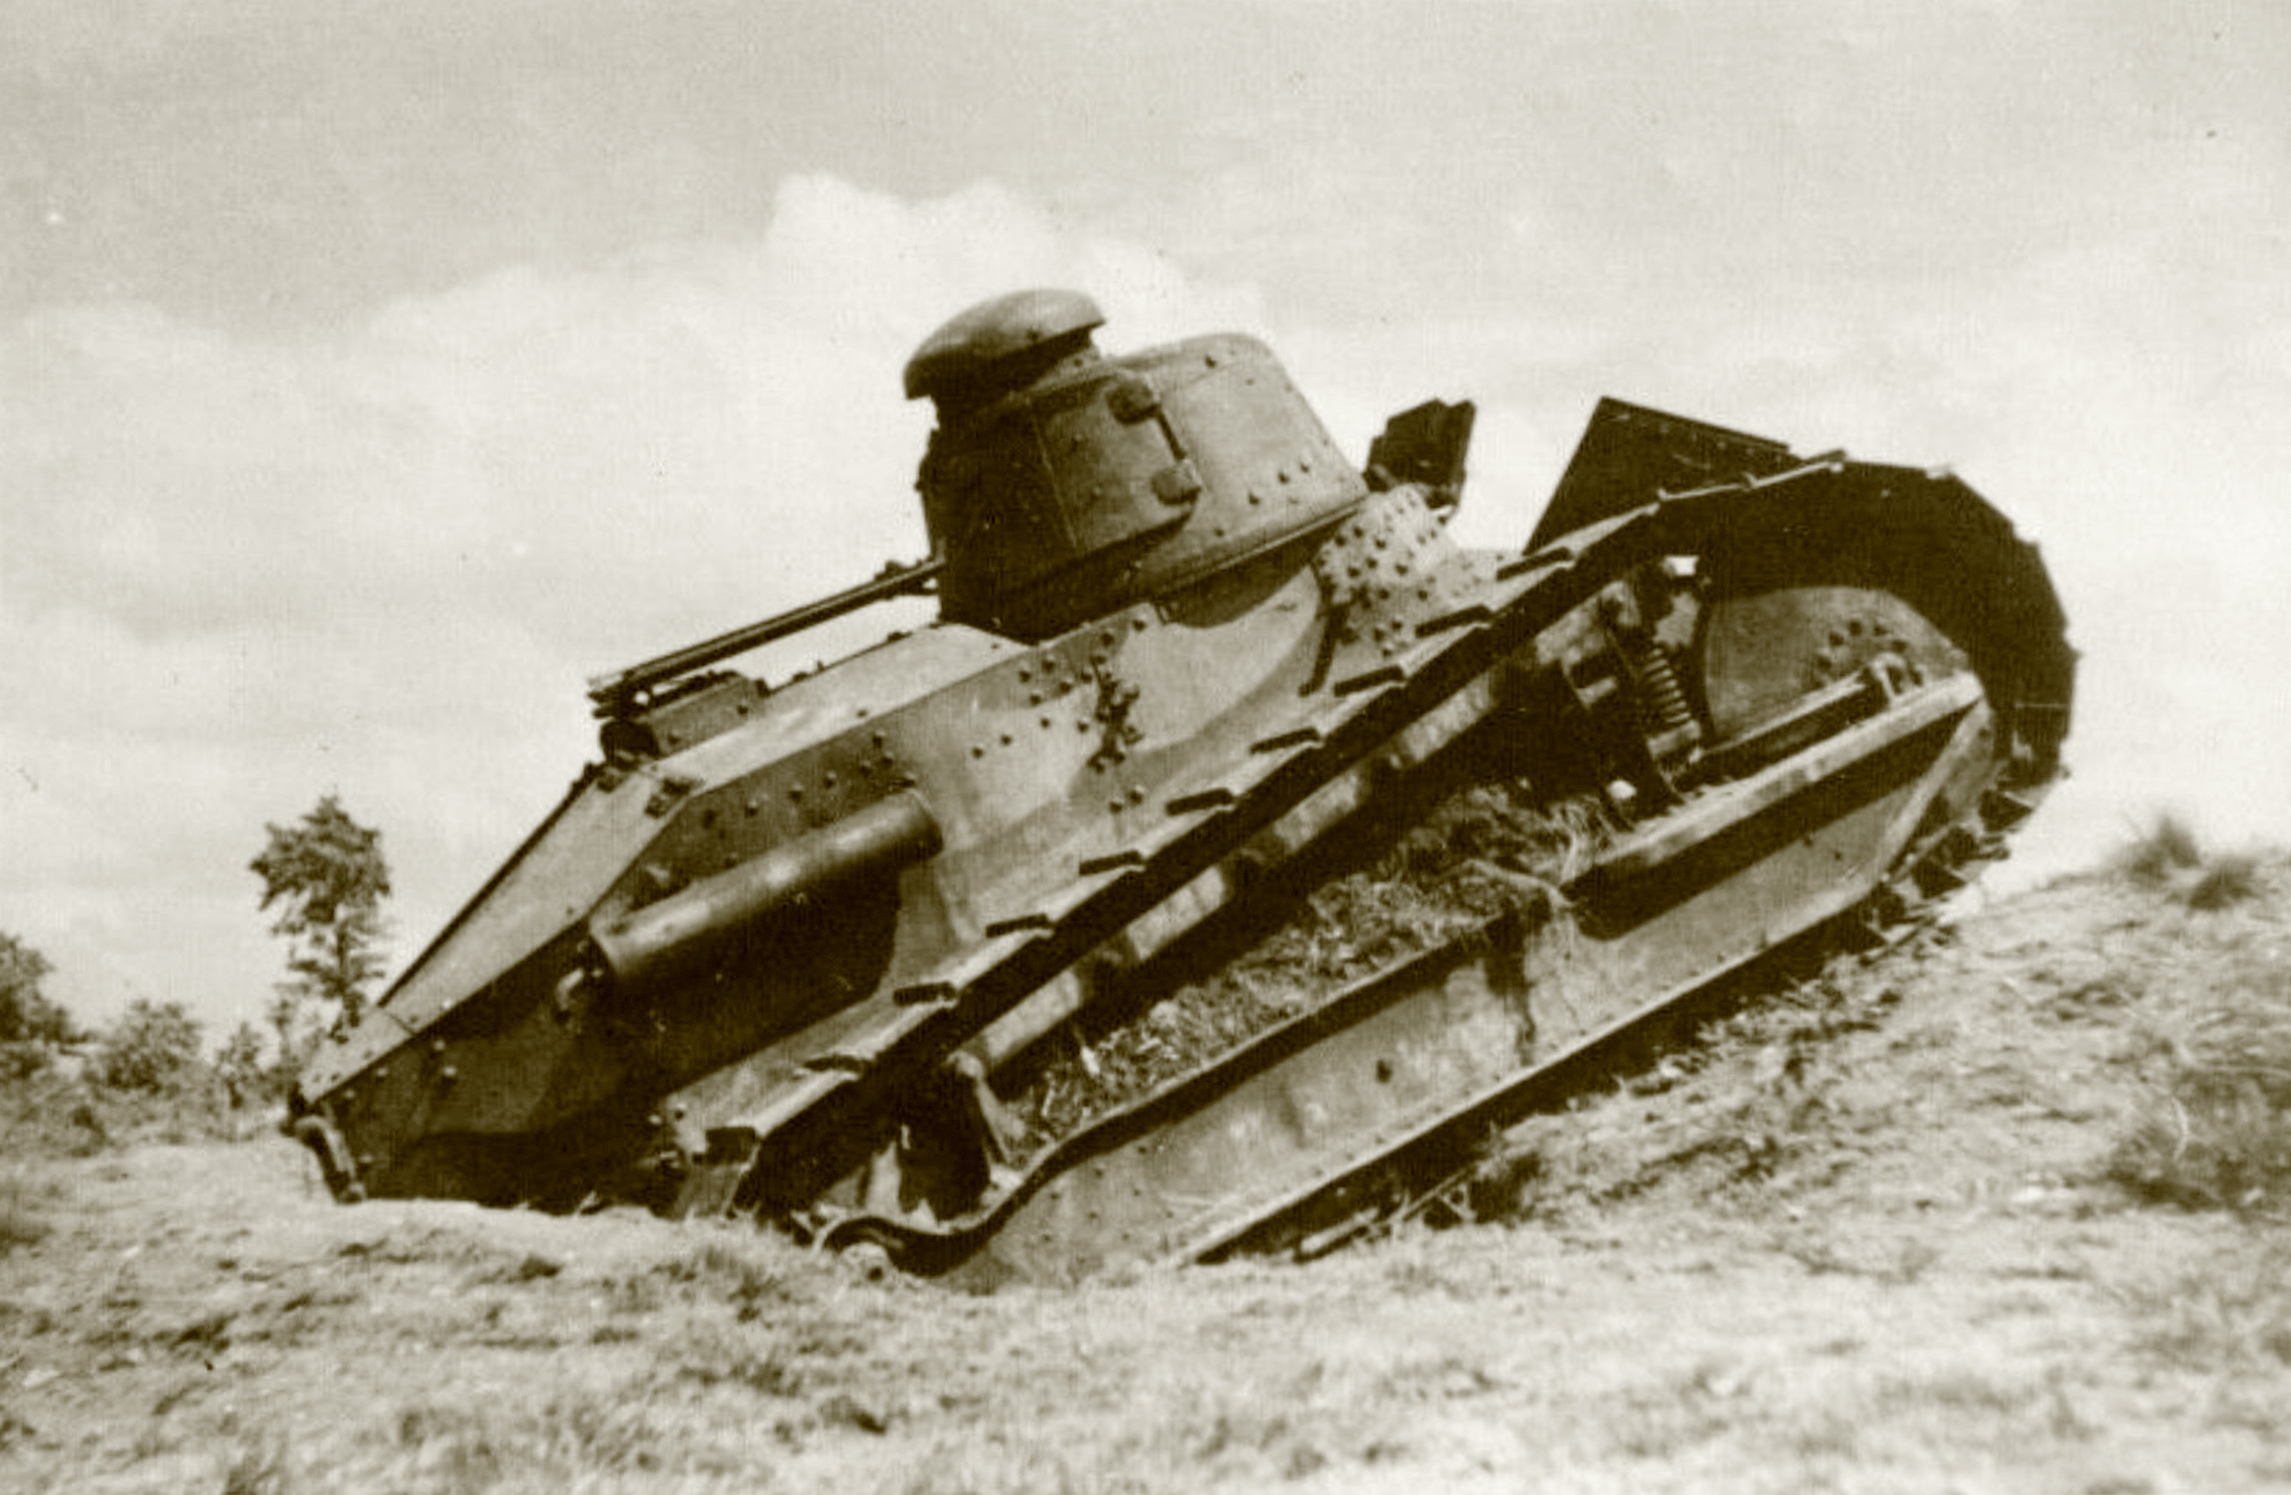 French Army Renault FT 17 captured during the Battle of France 1940 ebay 03